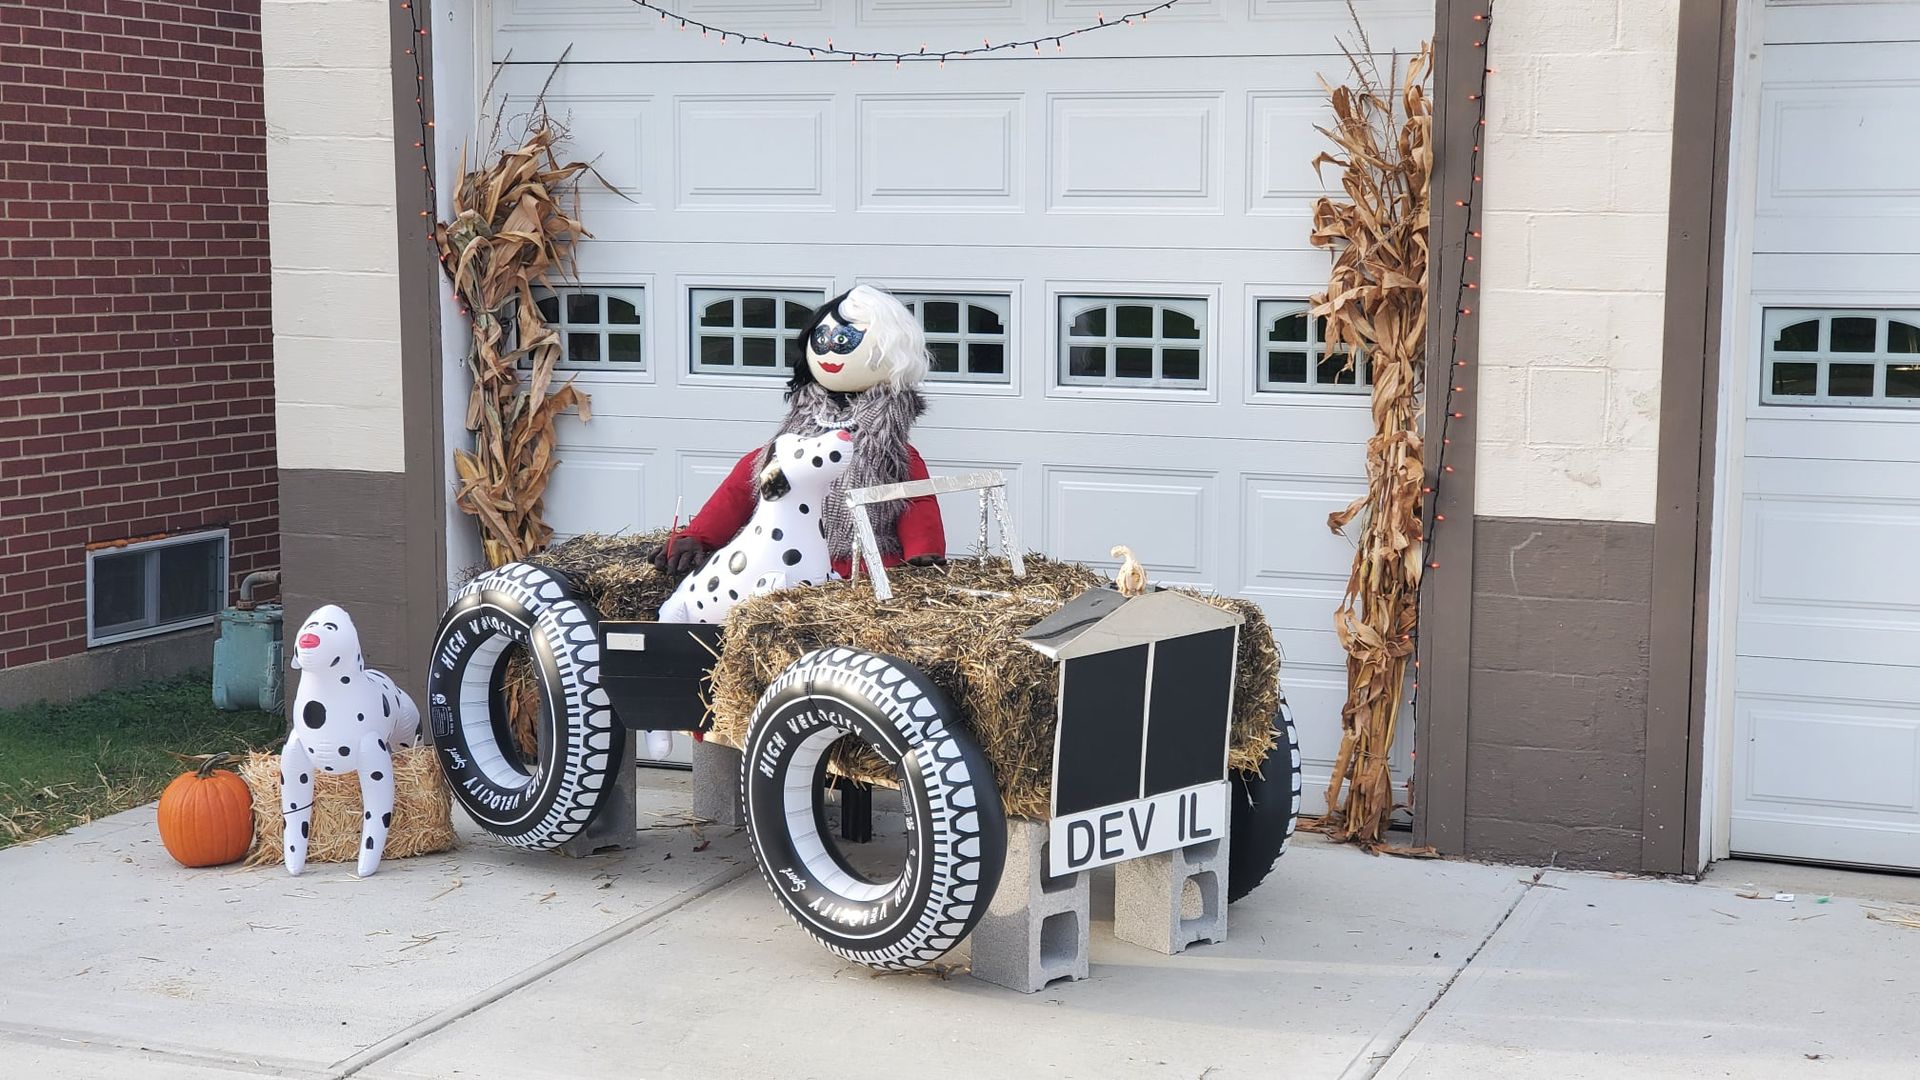 A 101 Dalmatians themed scarecrow display with Cruella Devil sitting in a car next to a blow up dalmatian. 